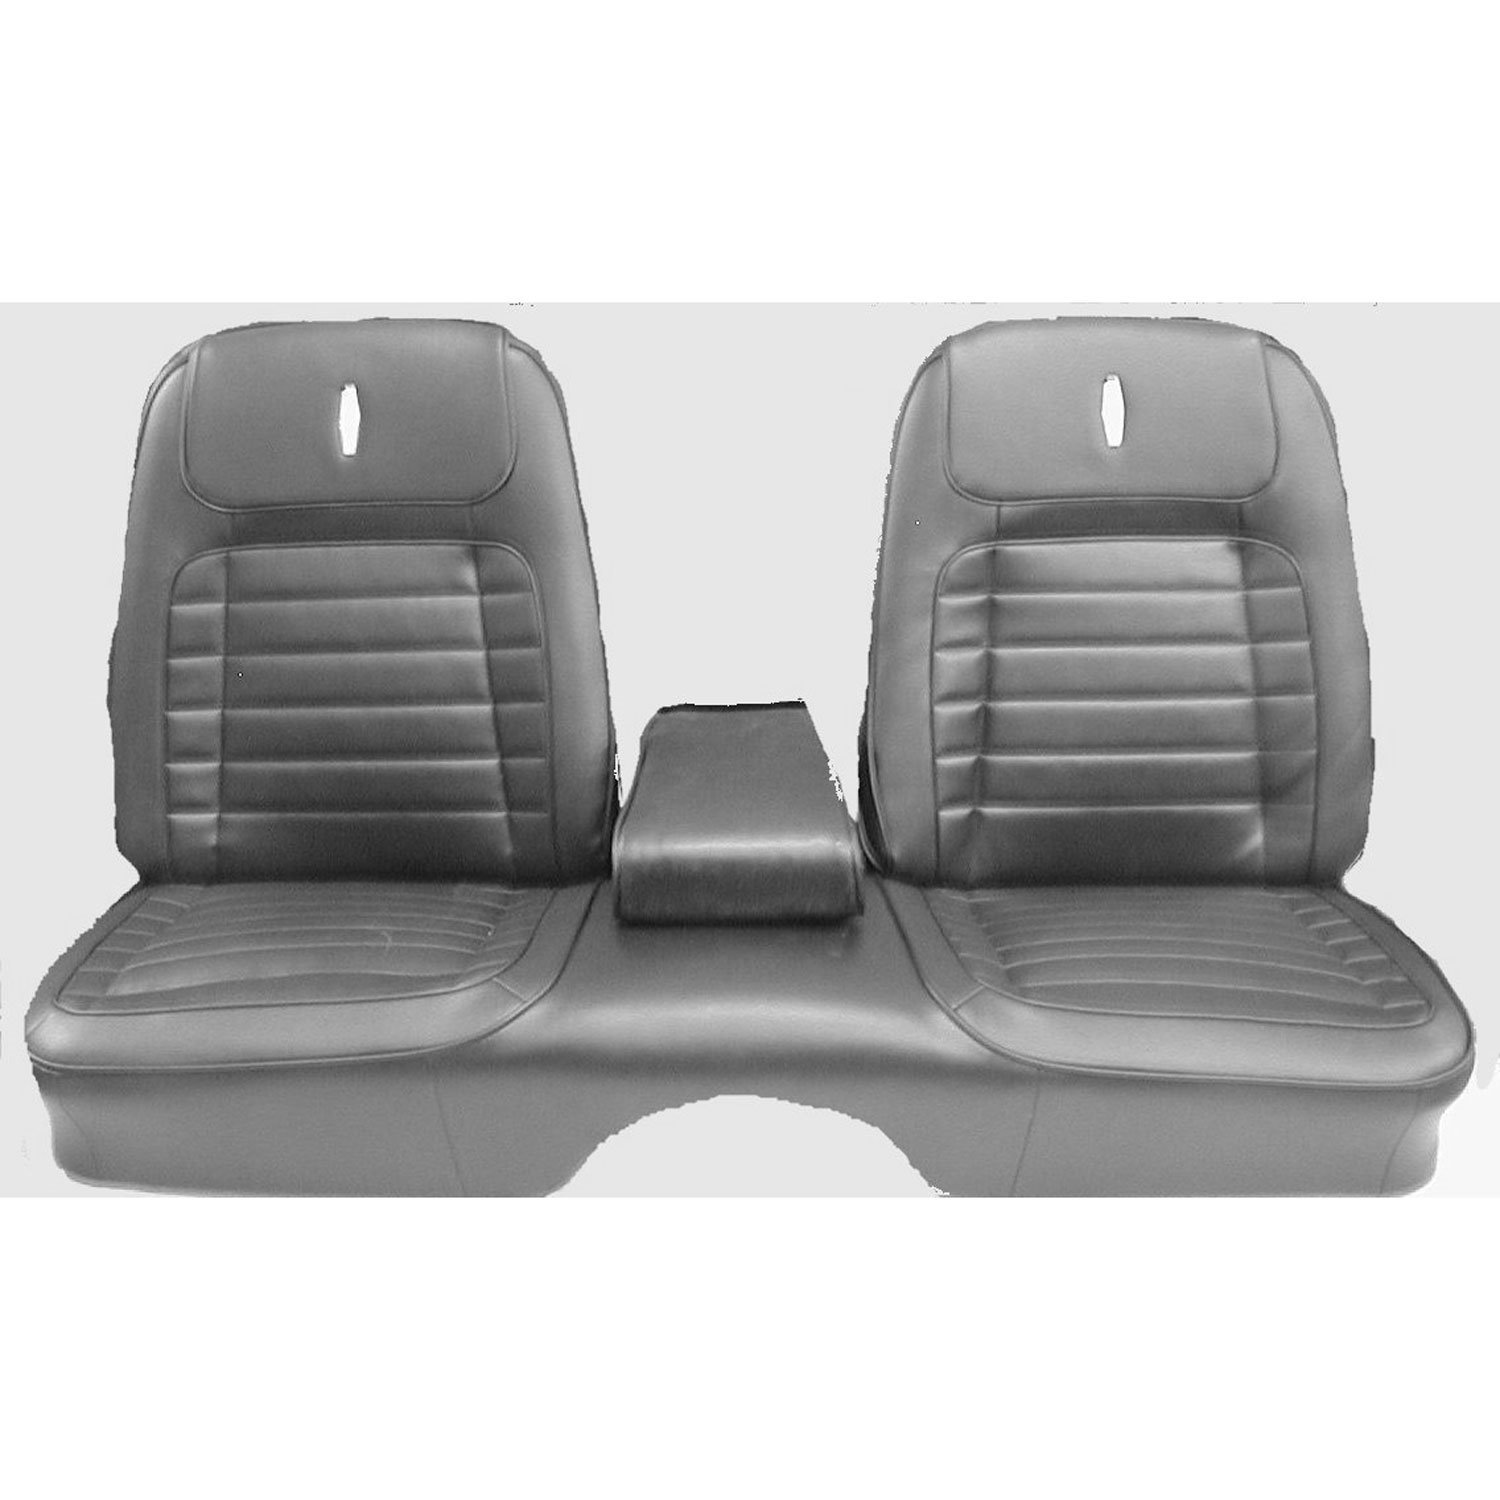 Deluxe Bench Seat Cover with Armrest 1968 Camaro